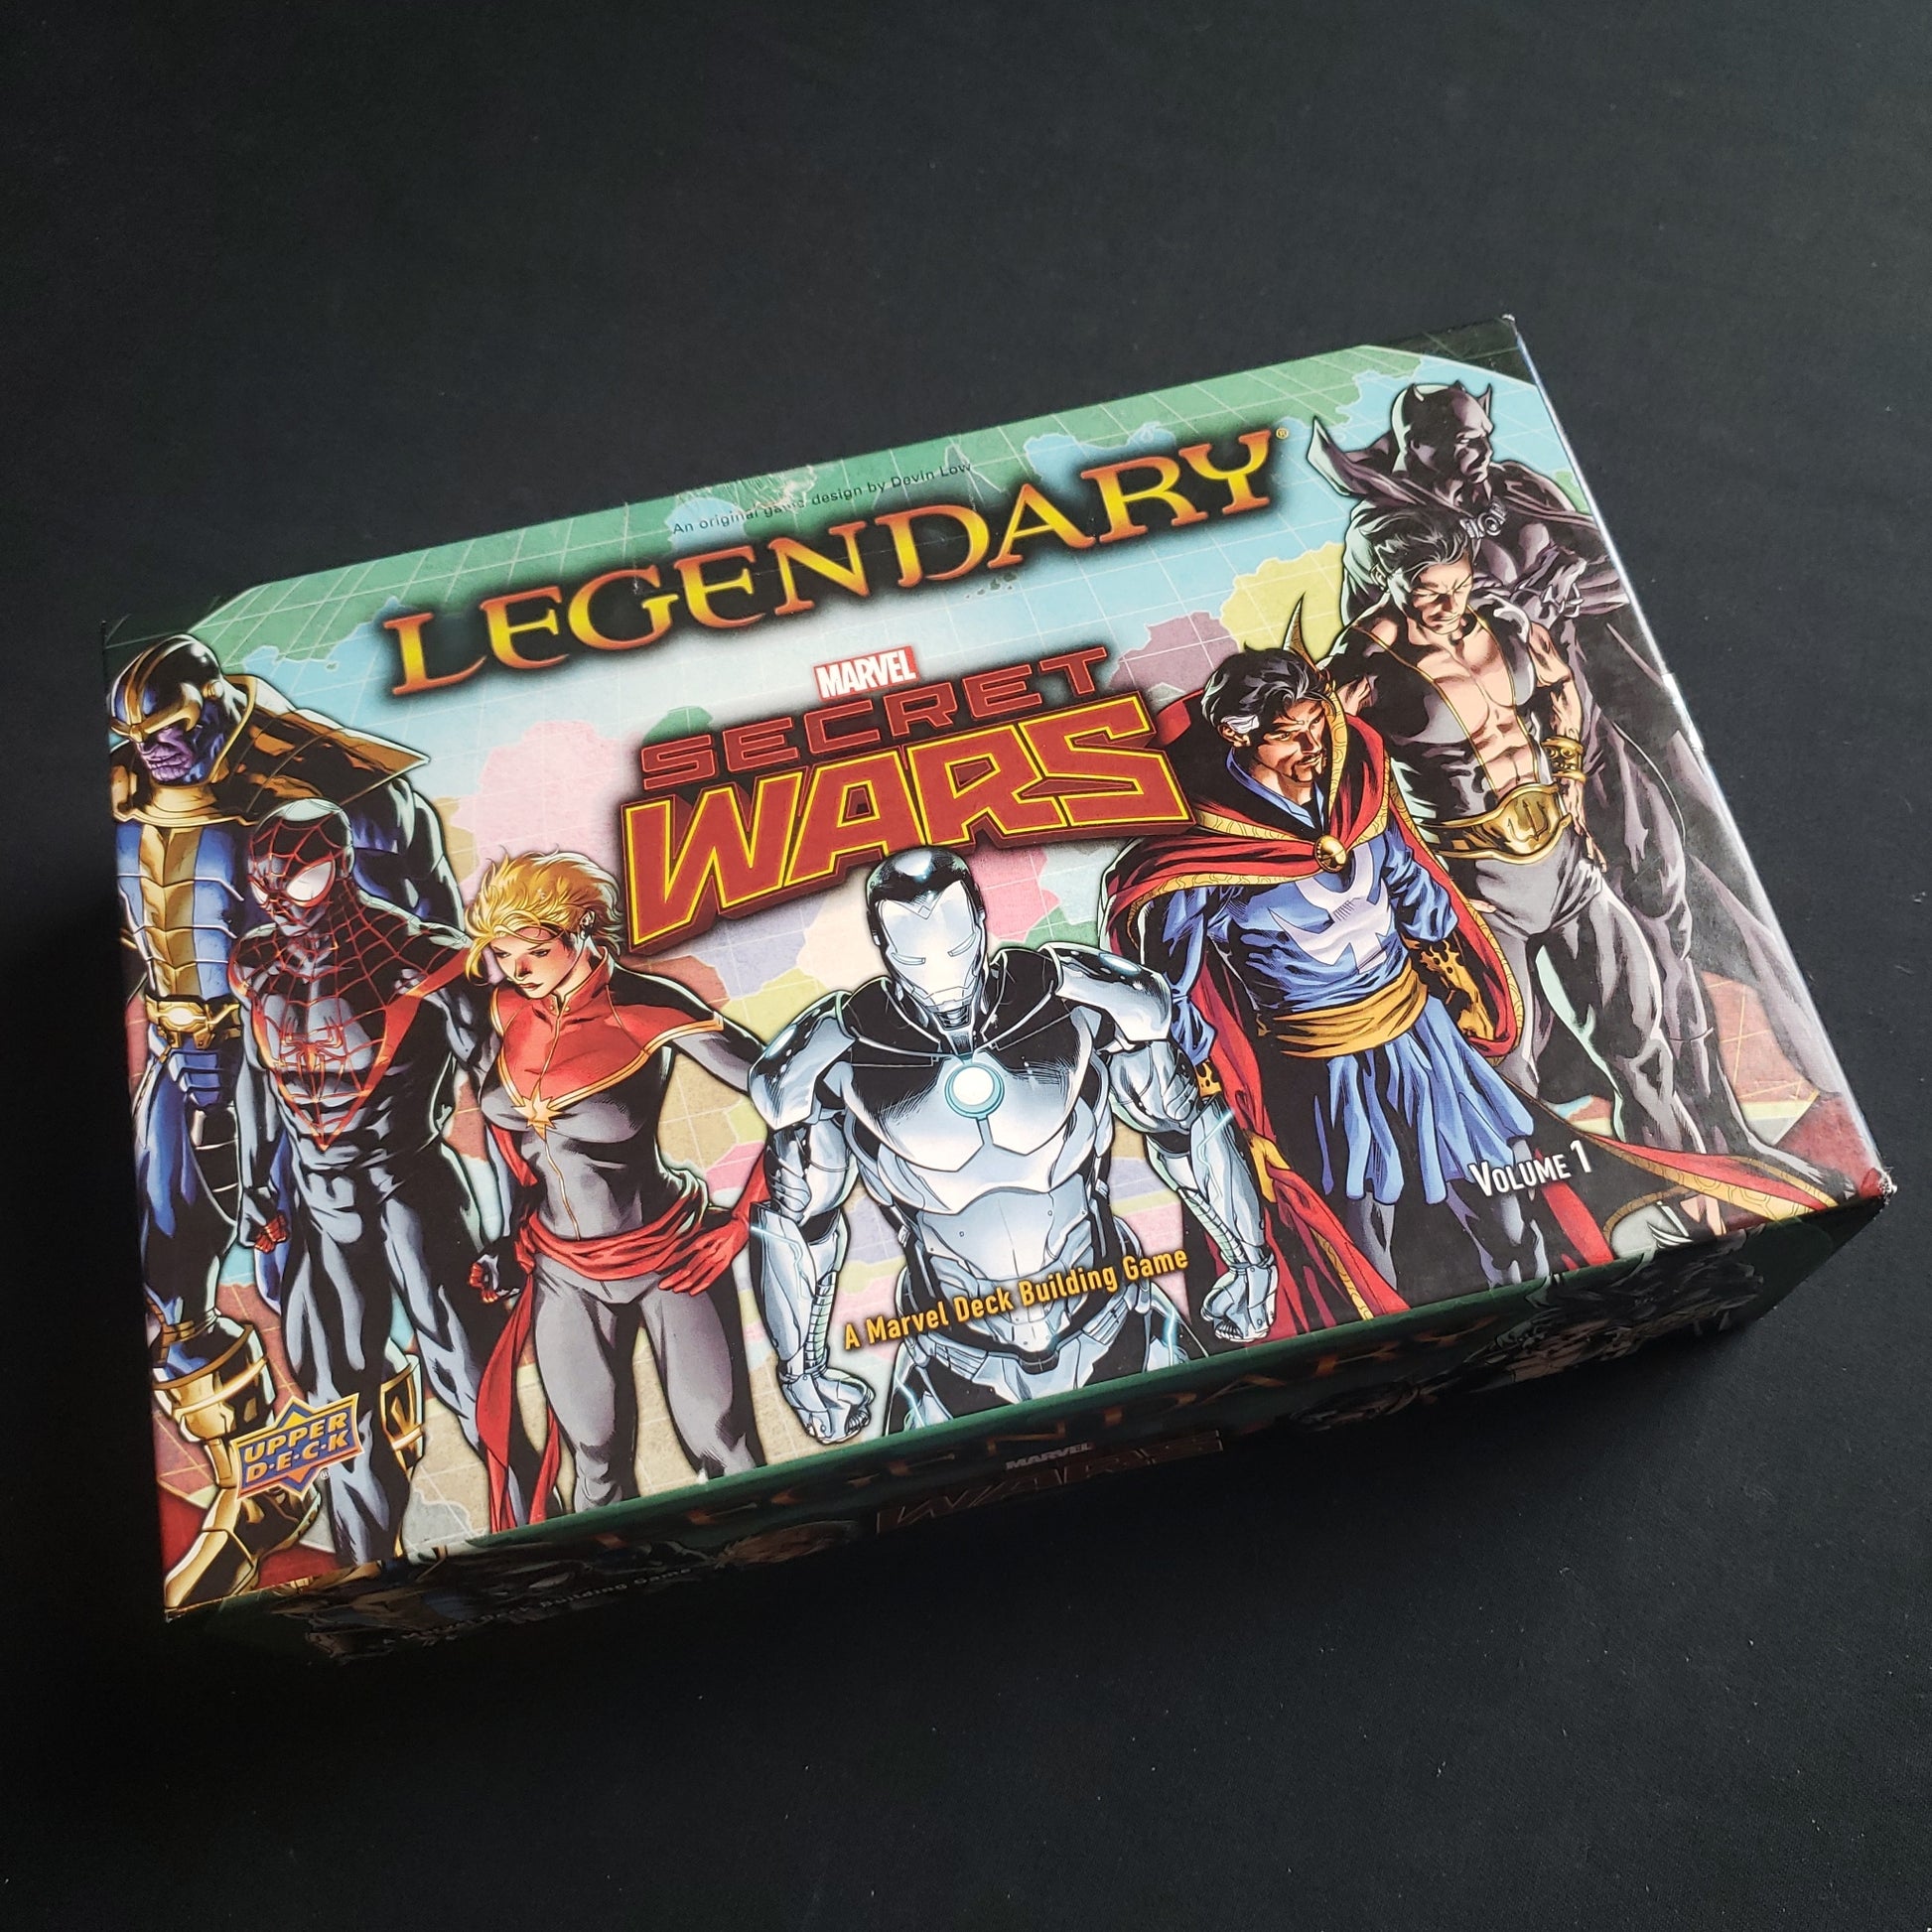 Image shows the front of the box for the Secret Wars Volume 1 expansion for the card game Legendary Marvel